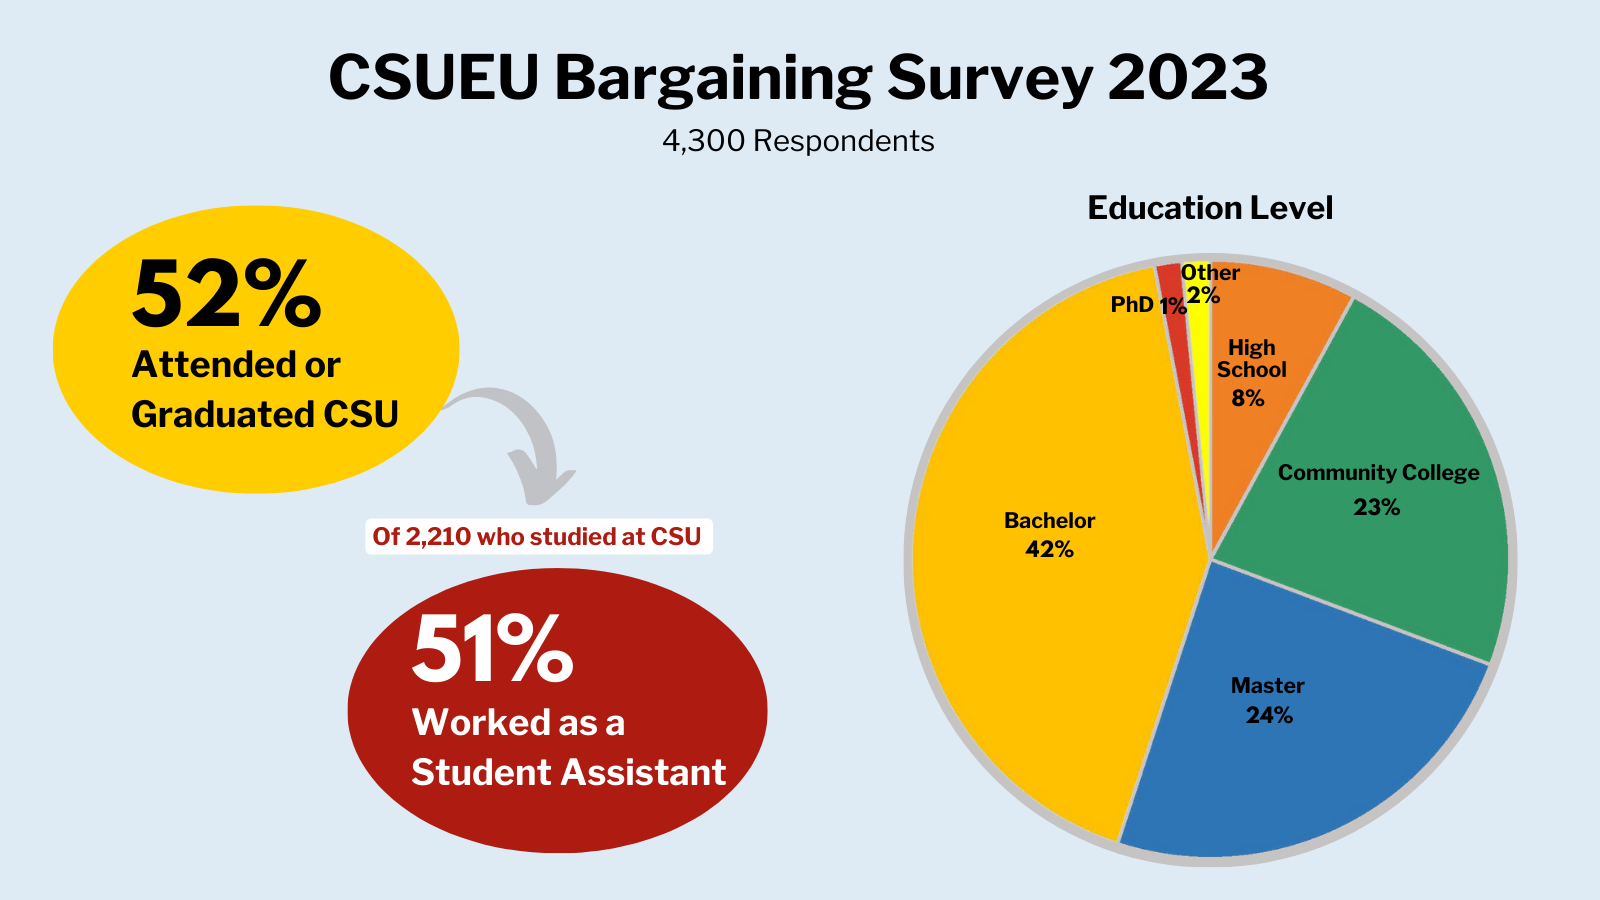 52% of respondents say they attended or graduated from the CSU. Of that group of 2,210, 51% report having worked as a Student Assistant during their CSU years. And a full two-thirds of respondents have a bachelor's or master's degree.